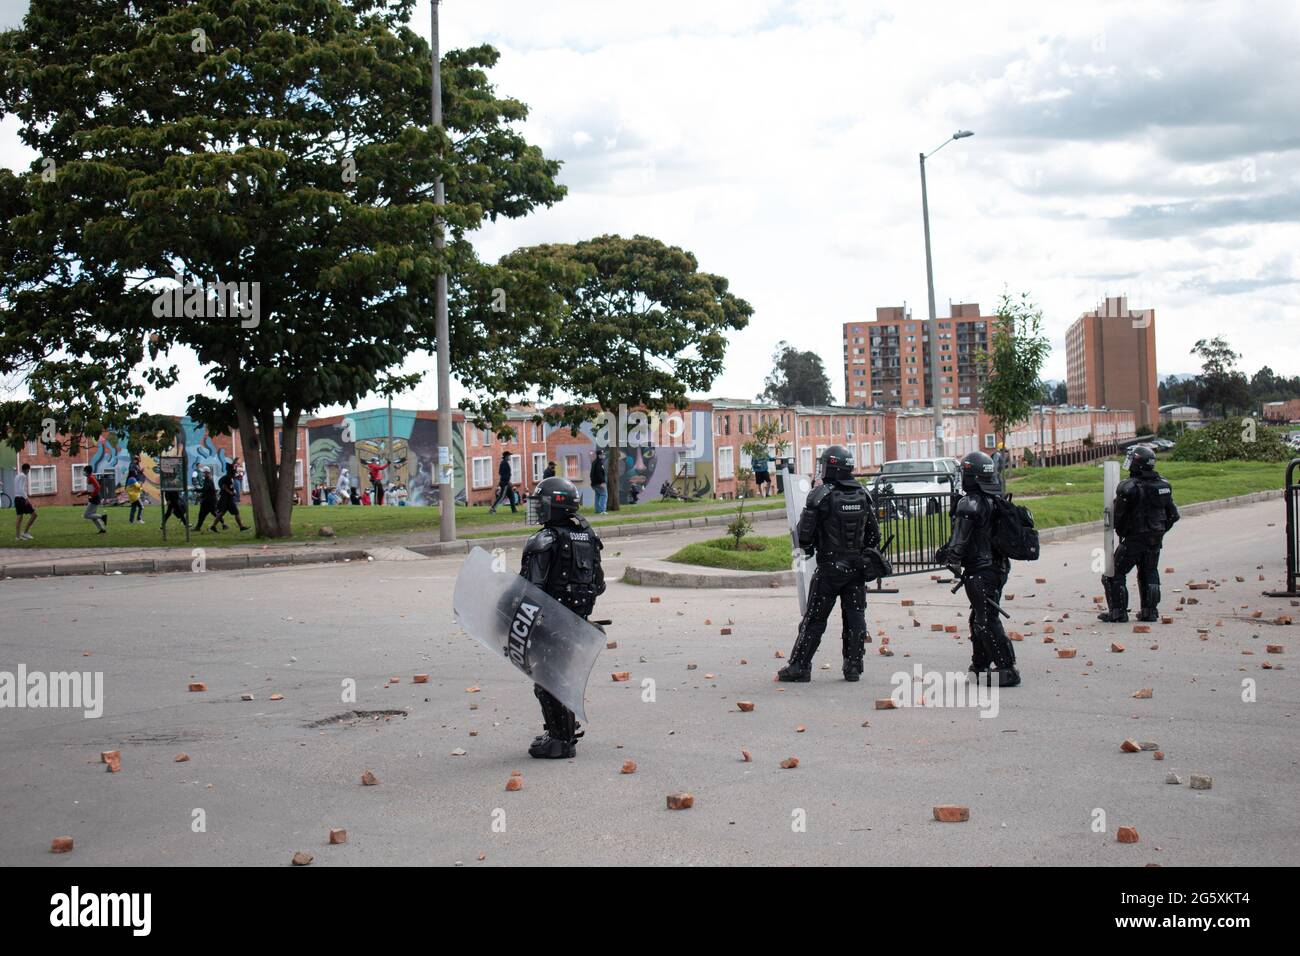 Colombia's riot police officers (ESMAD) use police batons, tear gas canisters and flashbang grendandes, stunt grenades, as people of Fontanar - Suba in Bogota, Colombia protested and clashed against Colombia's riot police (Escuadron Movil Antidisturbios ESMAD) against the visit of Colombia's president Ivan Duque Marquez to a park were Bogota's metro system will be built, amidst two months of anti-government protests against president Ivan Duque Marquez, inequalities and police unrest during the protests, on June 29, 2021. Stock Photo